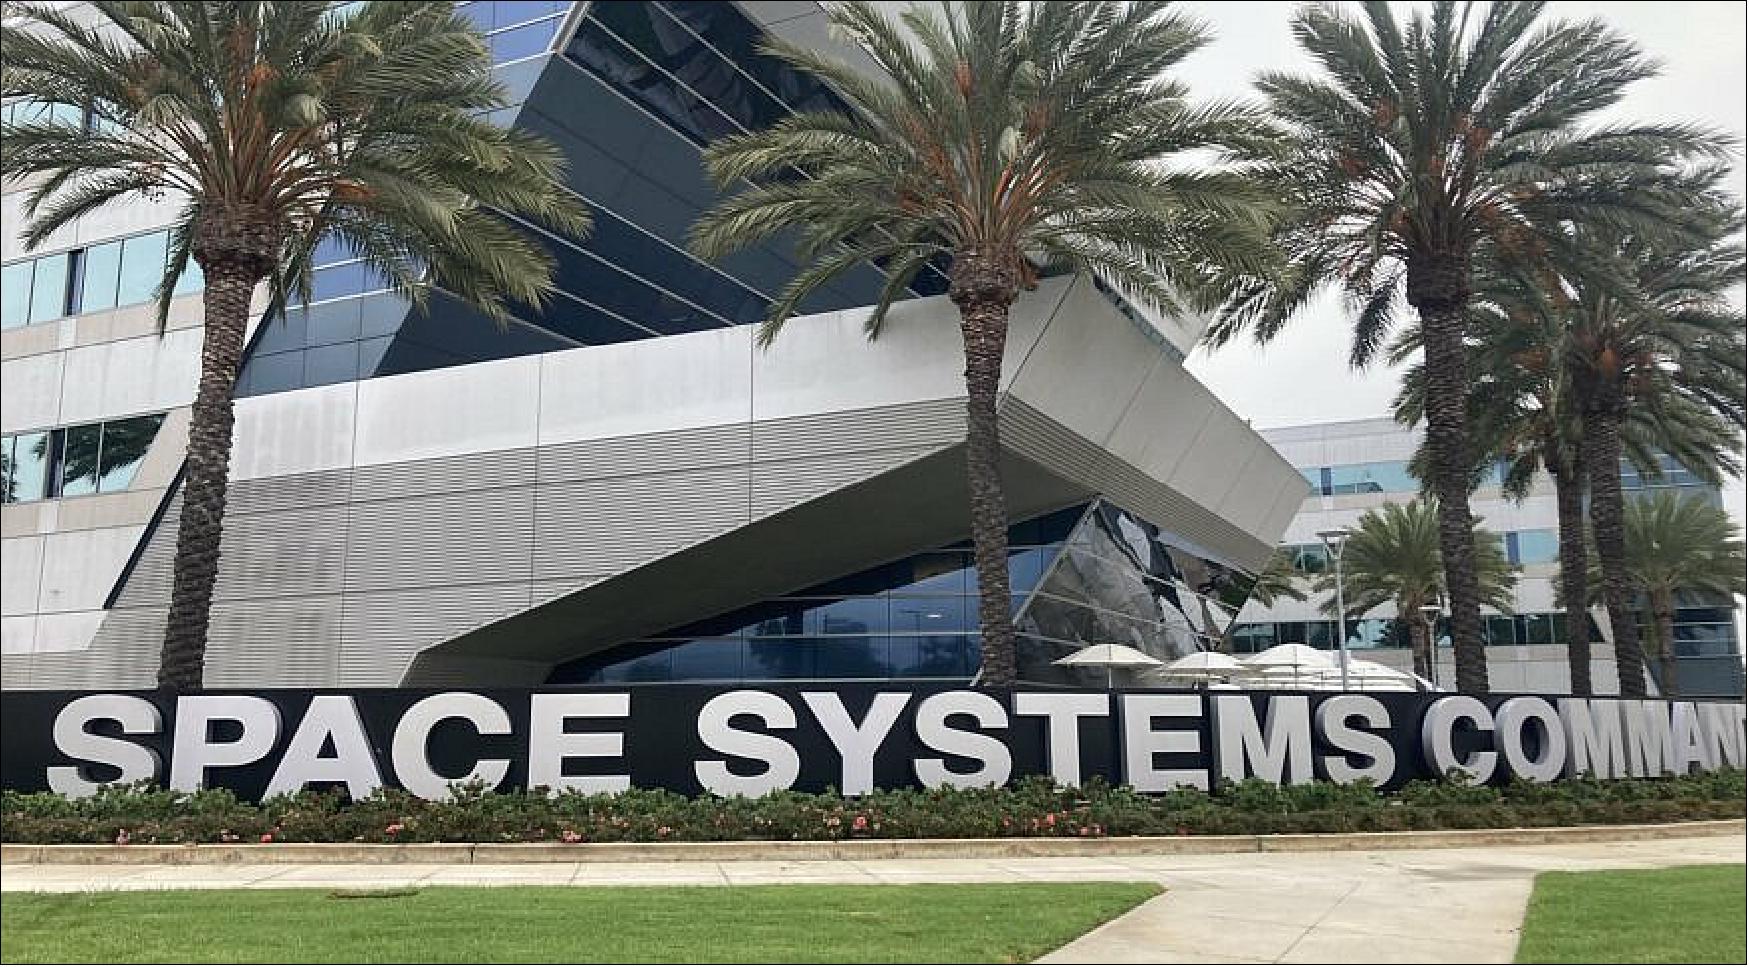 Figure 42: The Space Systems Command in Los Angeles procures satellites, launch services and other technologies for the U.S. Space Force (image credit: @USSF_SSC)